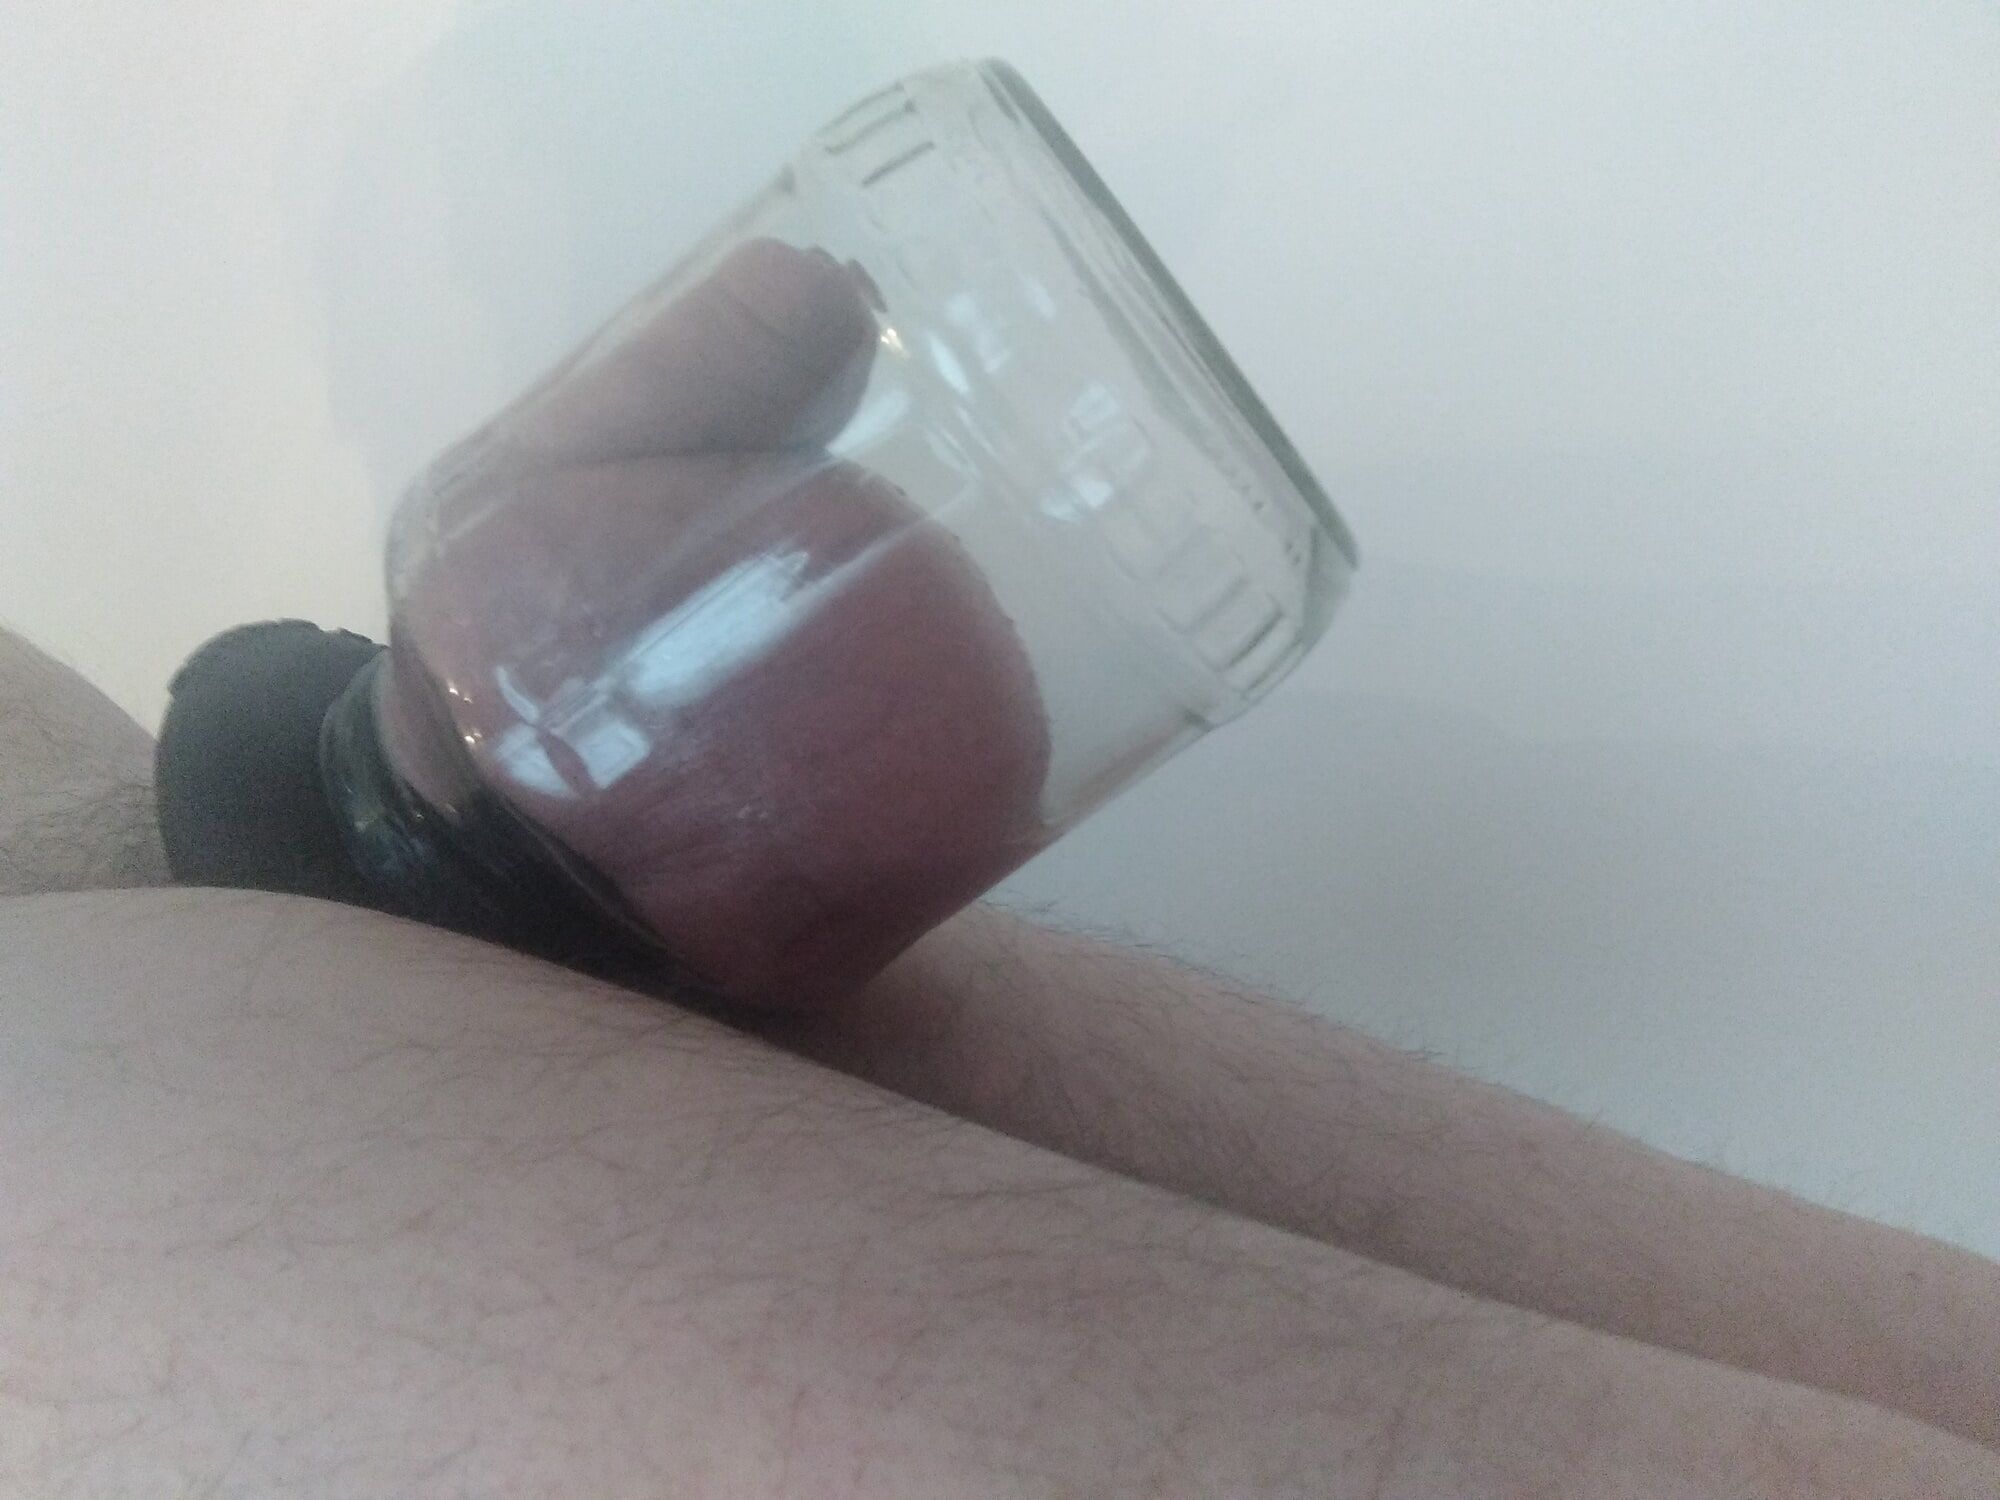 First Jar pumping session with Oxballs Juicy XL cockring #5